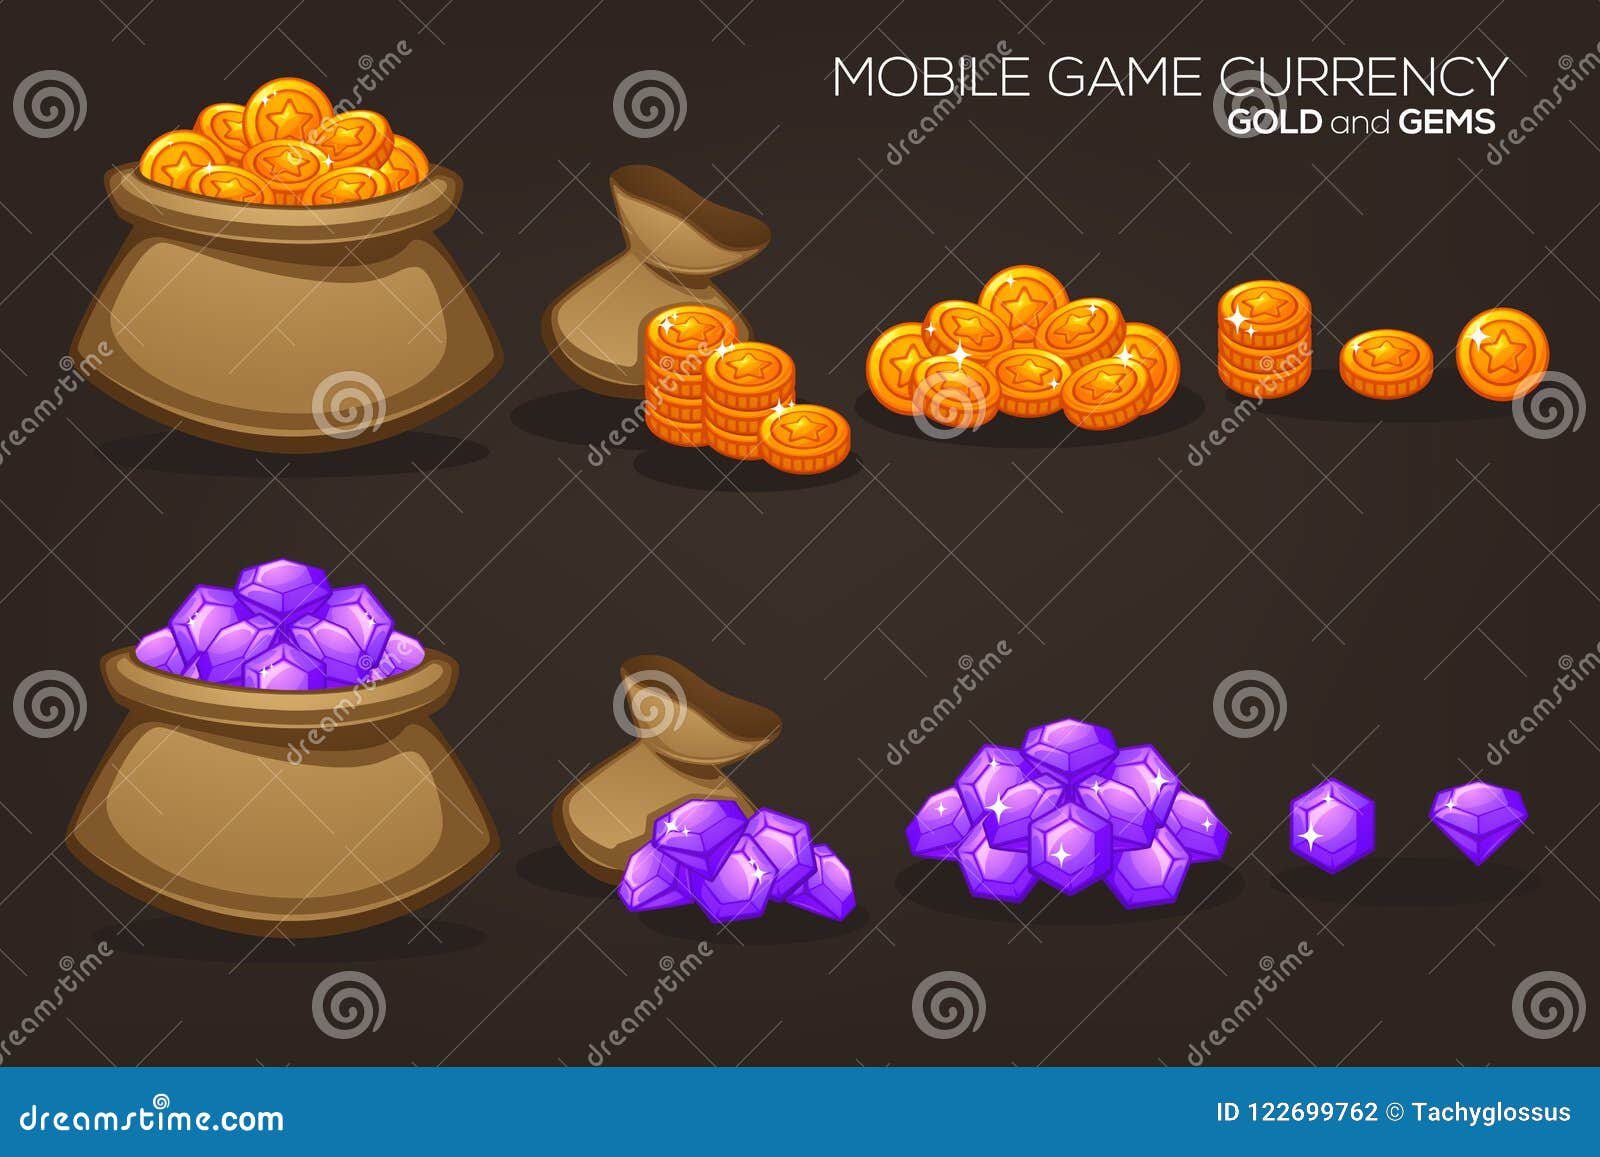 gold and gems, mobile game currency